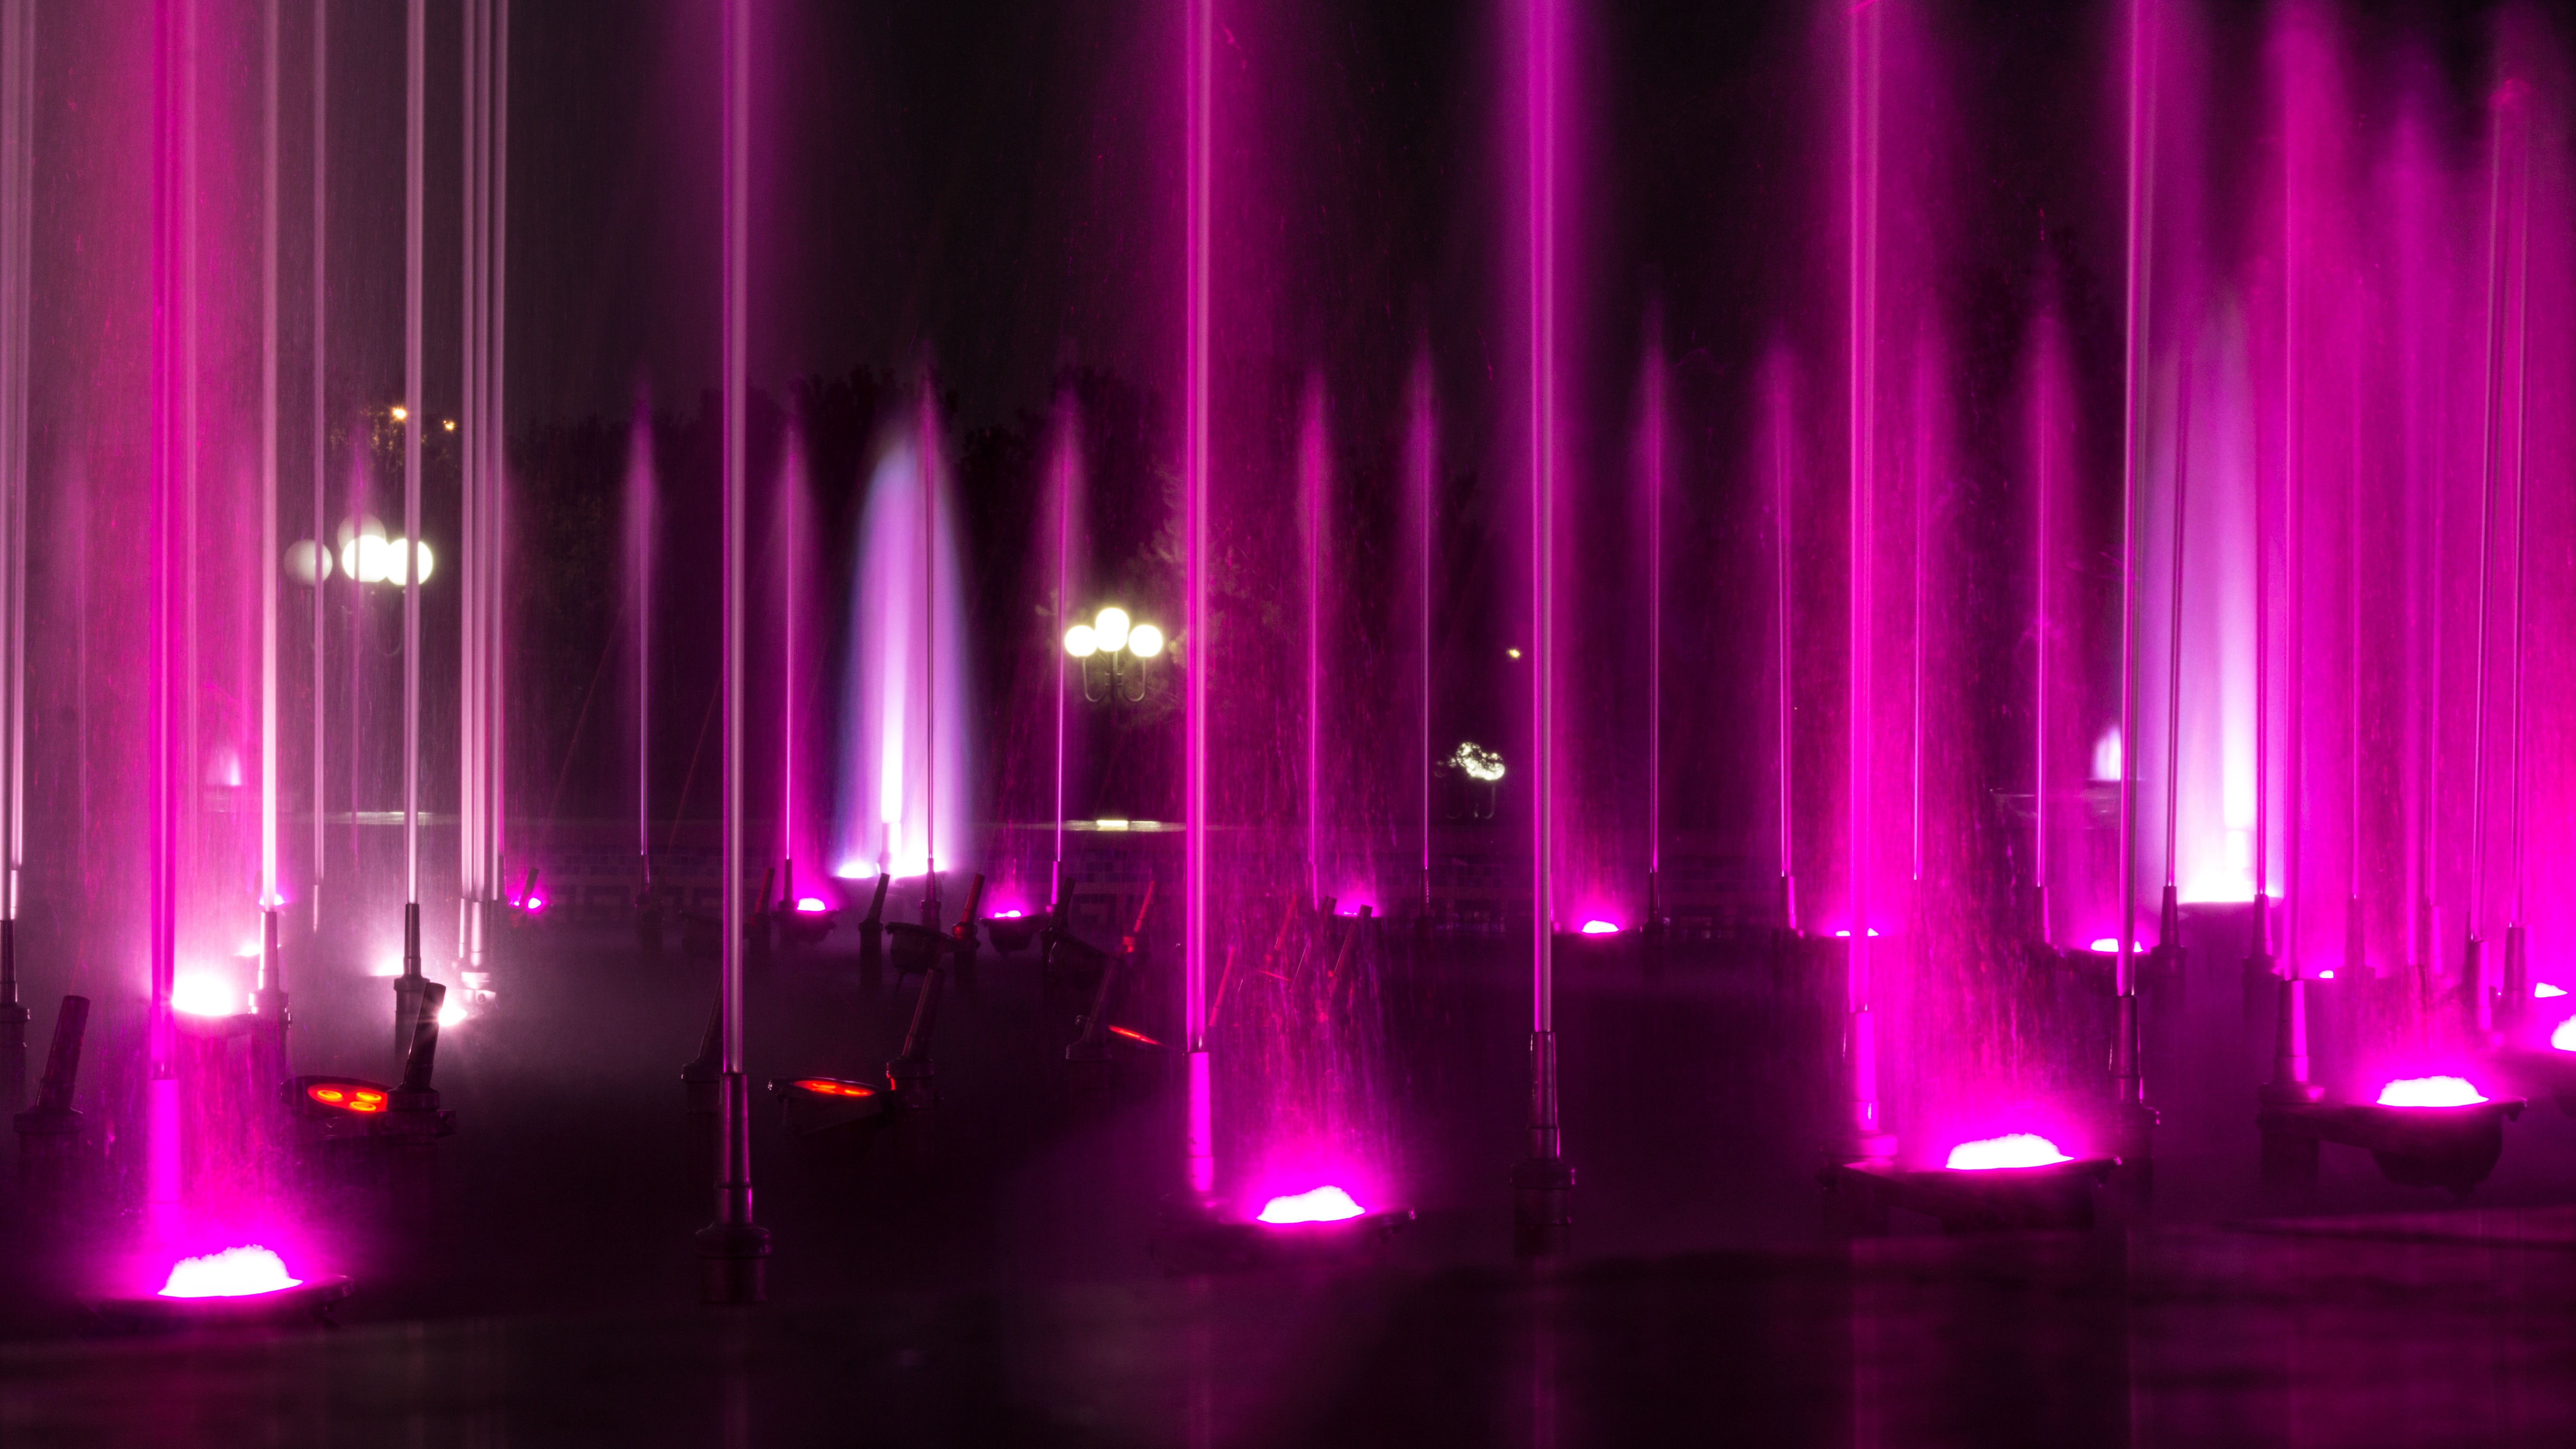 pink water fountains